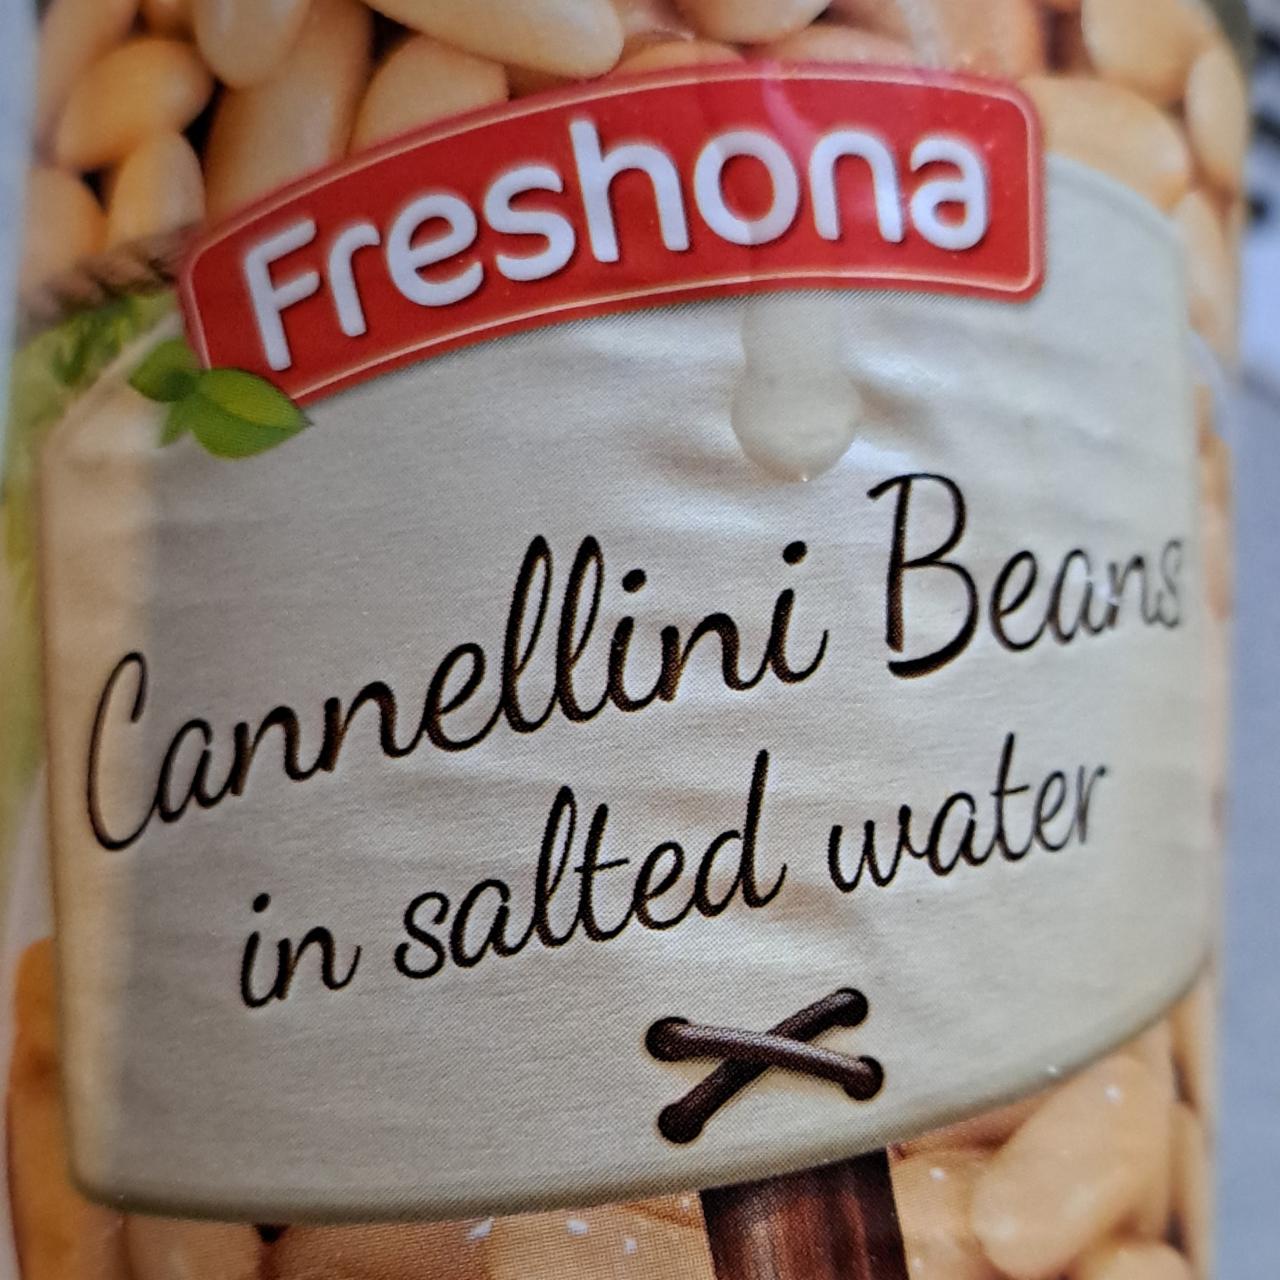 Fotografie - Cannellini Beans in salted water Freshona